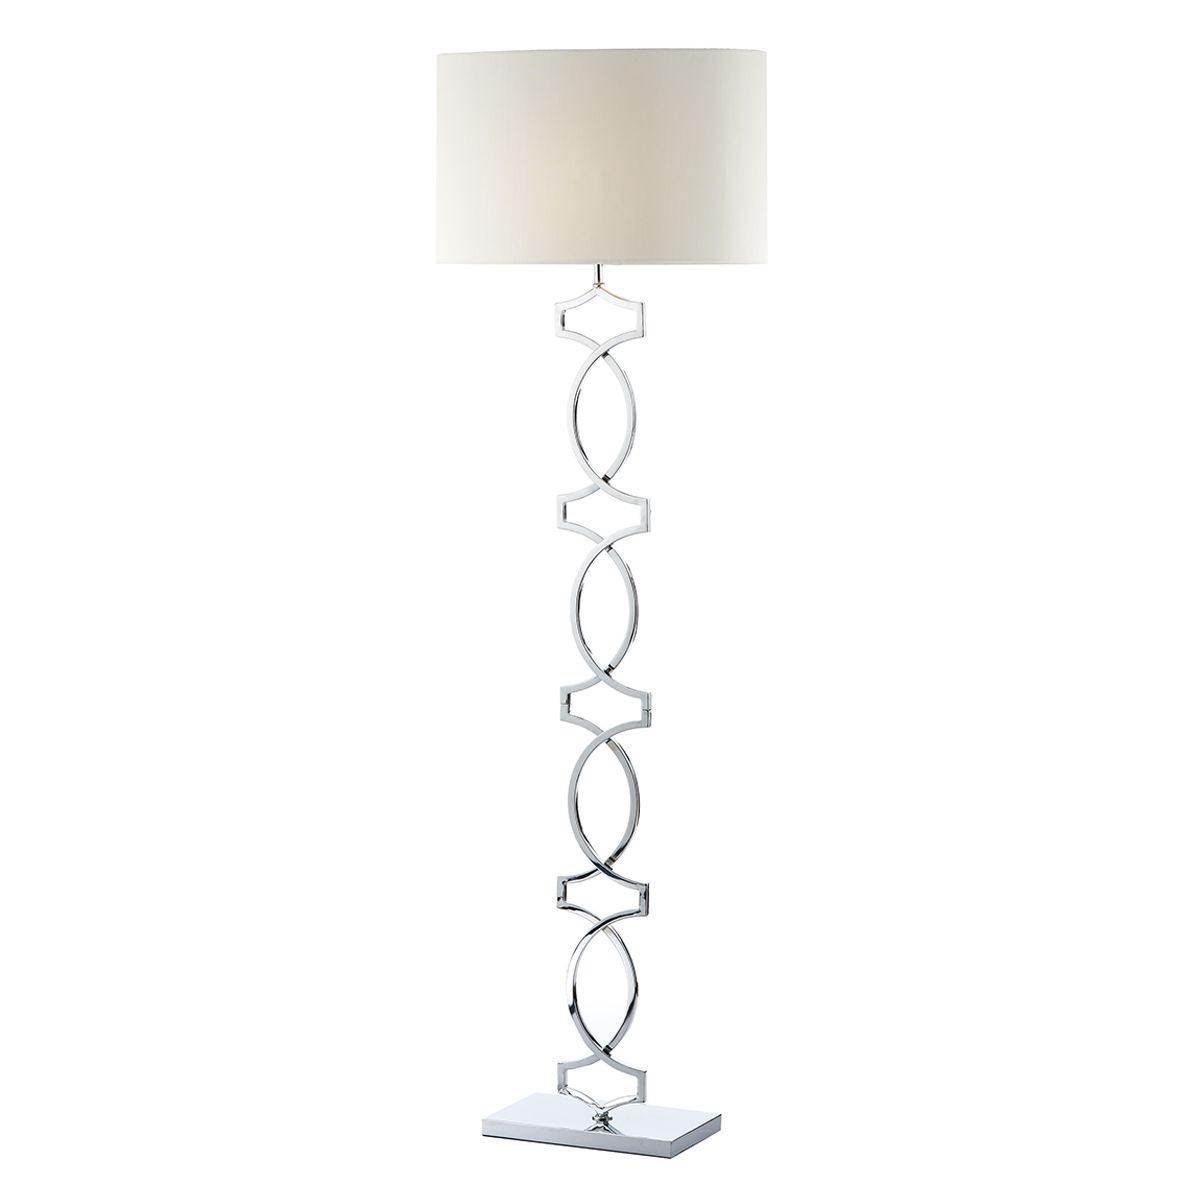 Dar Donovan Floor Lamp Polished Chrome complete with Shade - Cusack Lighting